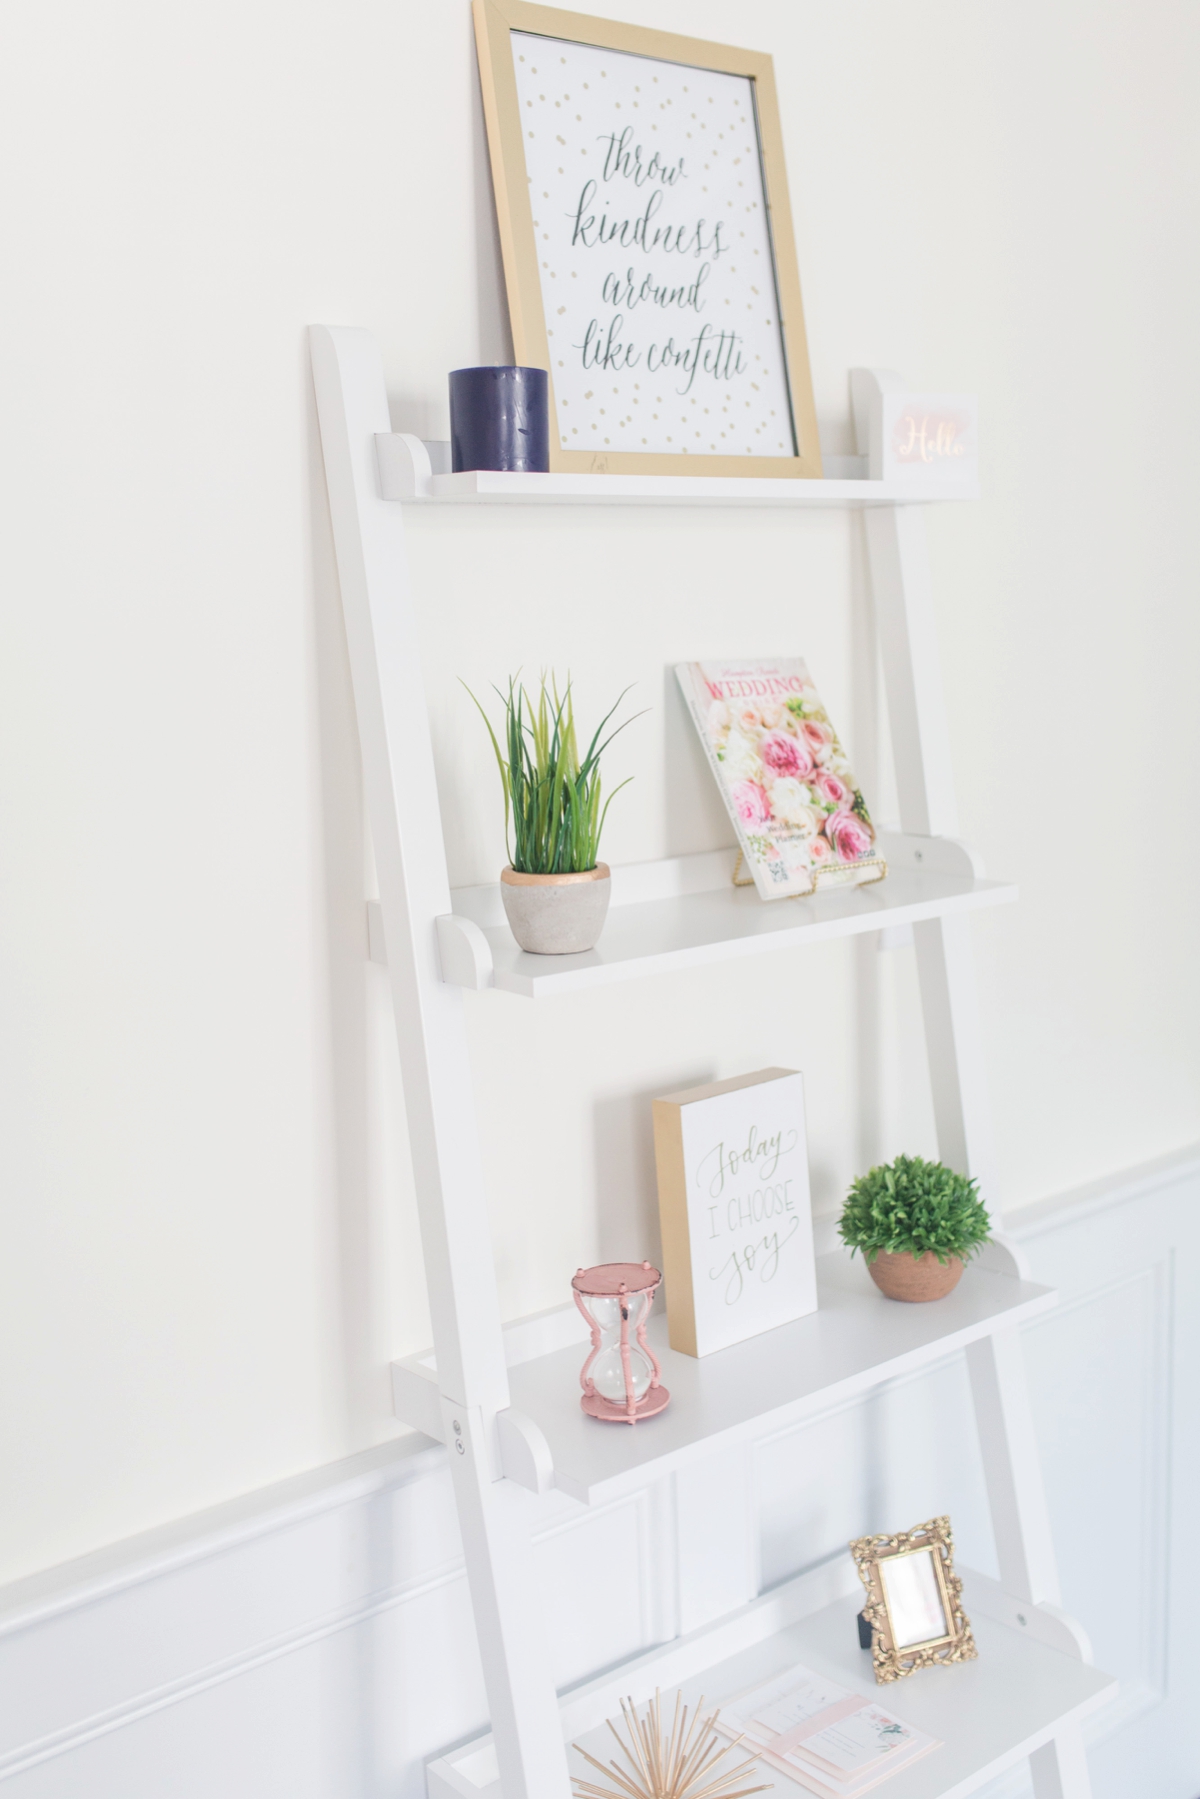 The Creative Corner Office Space | Angie McPherson Photography